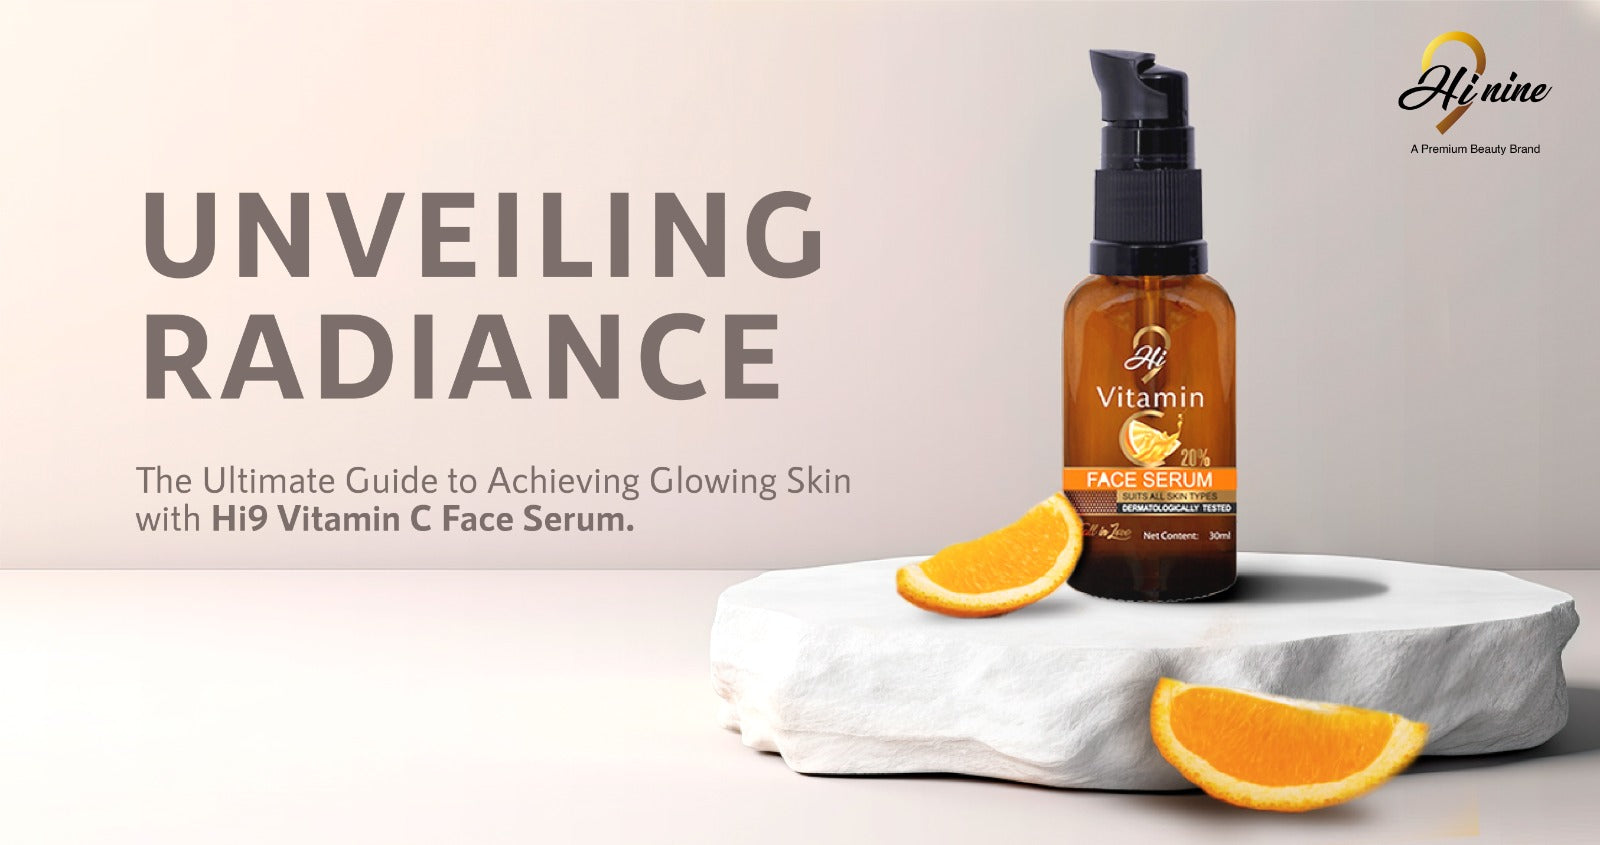 The Ultimate Guide to Achieving Glowing Skin with Hi9 Vitamin C Face Serum